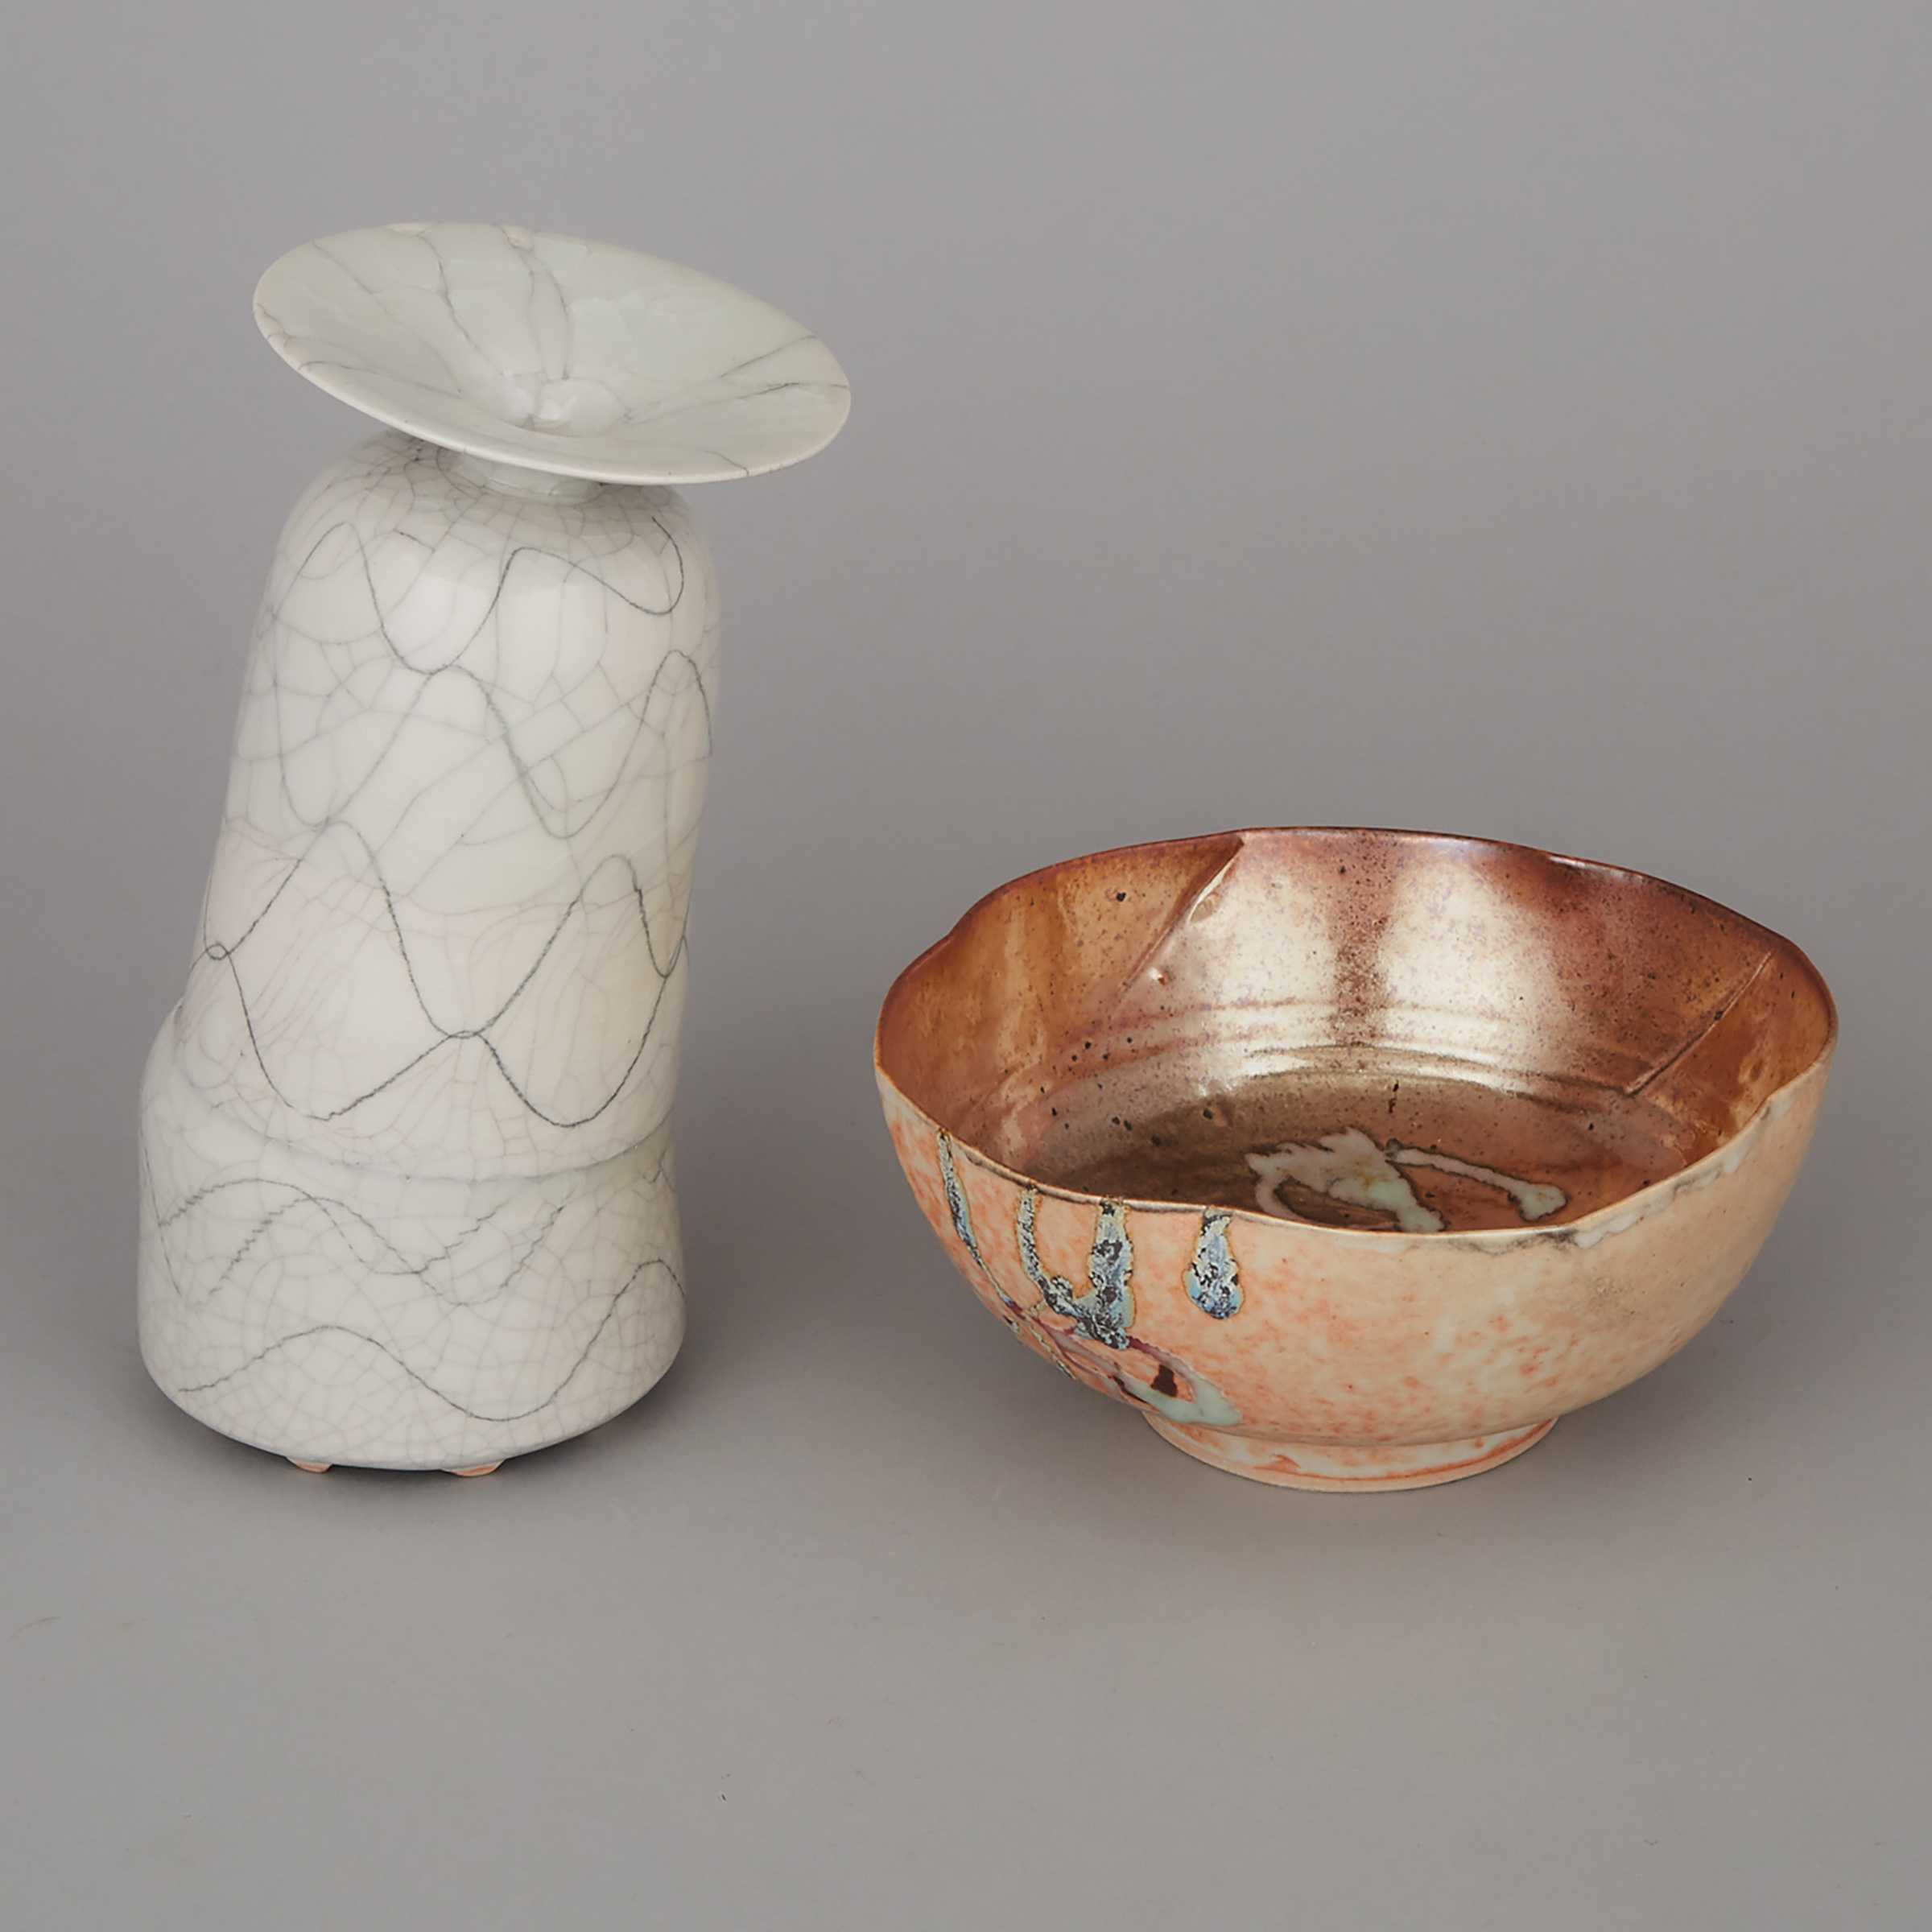 Kayo O’Young Vase and Bowl, late 20th/early 21st century